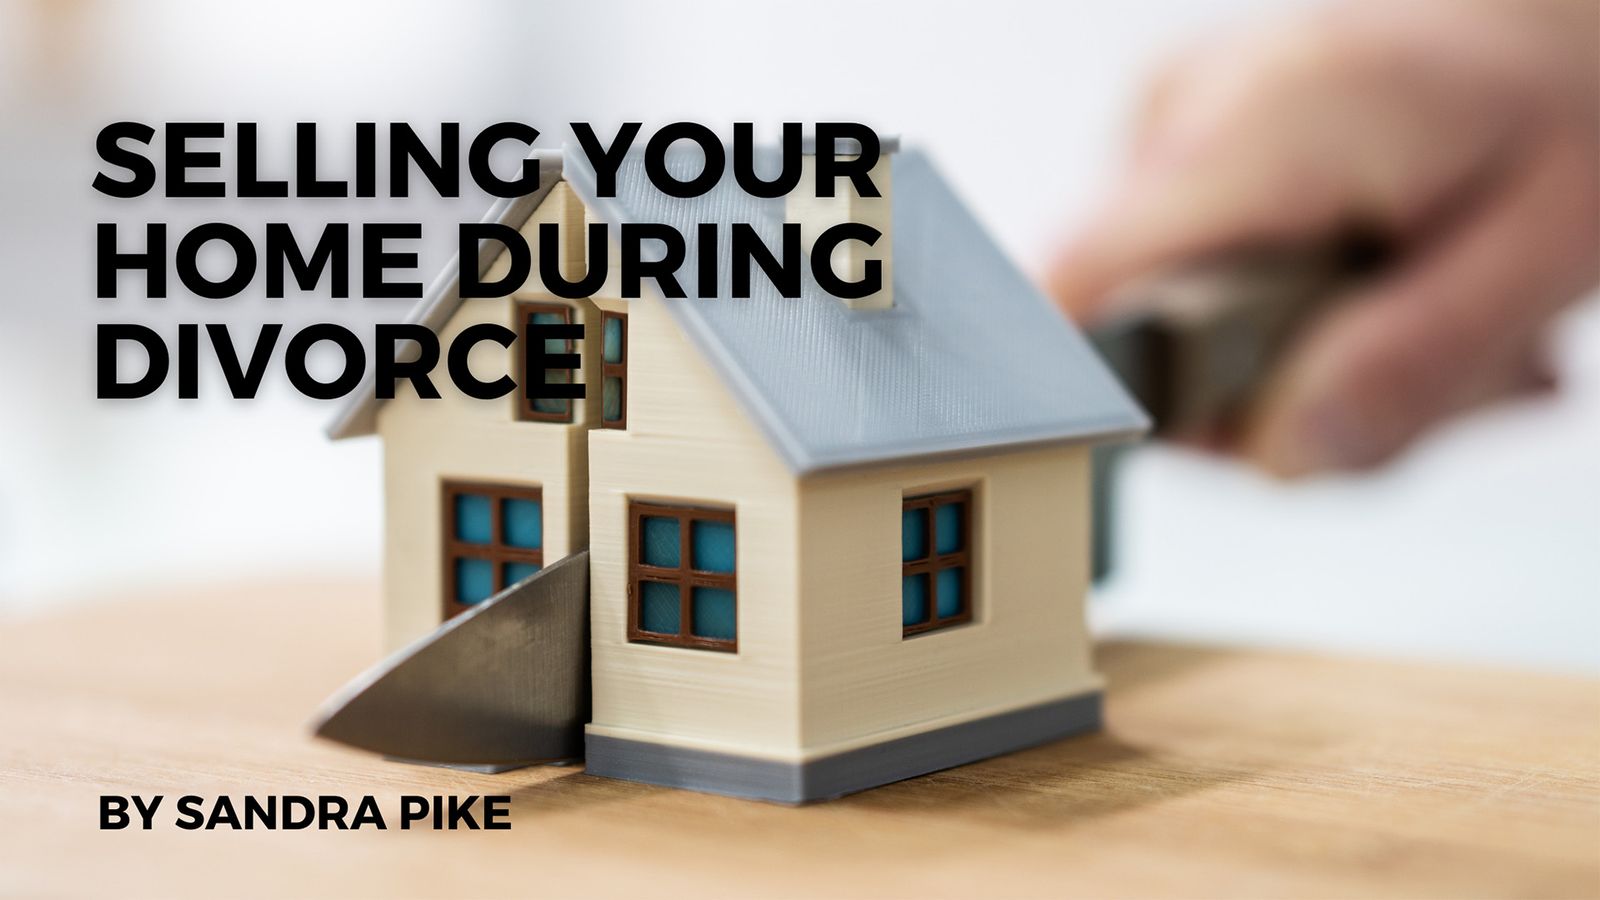 Selling your home during divorce